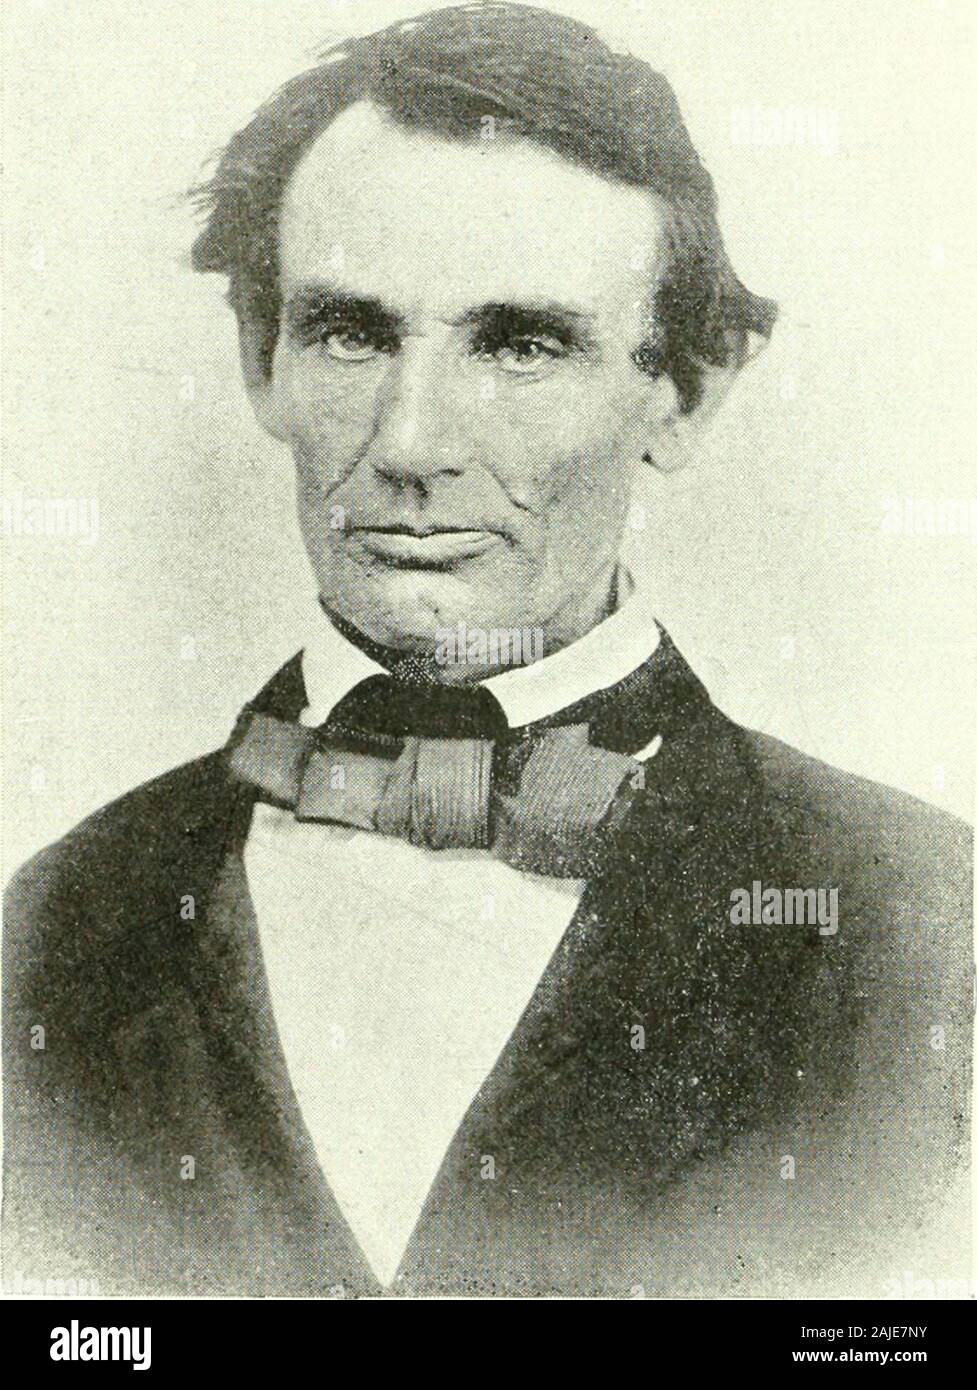 Abraham Lincoln before 1860 . tbe said that they have dragged